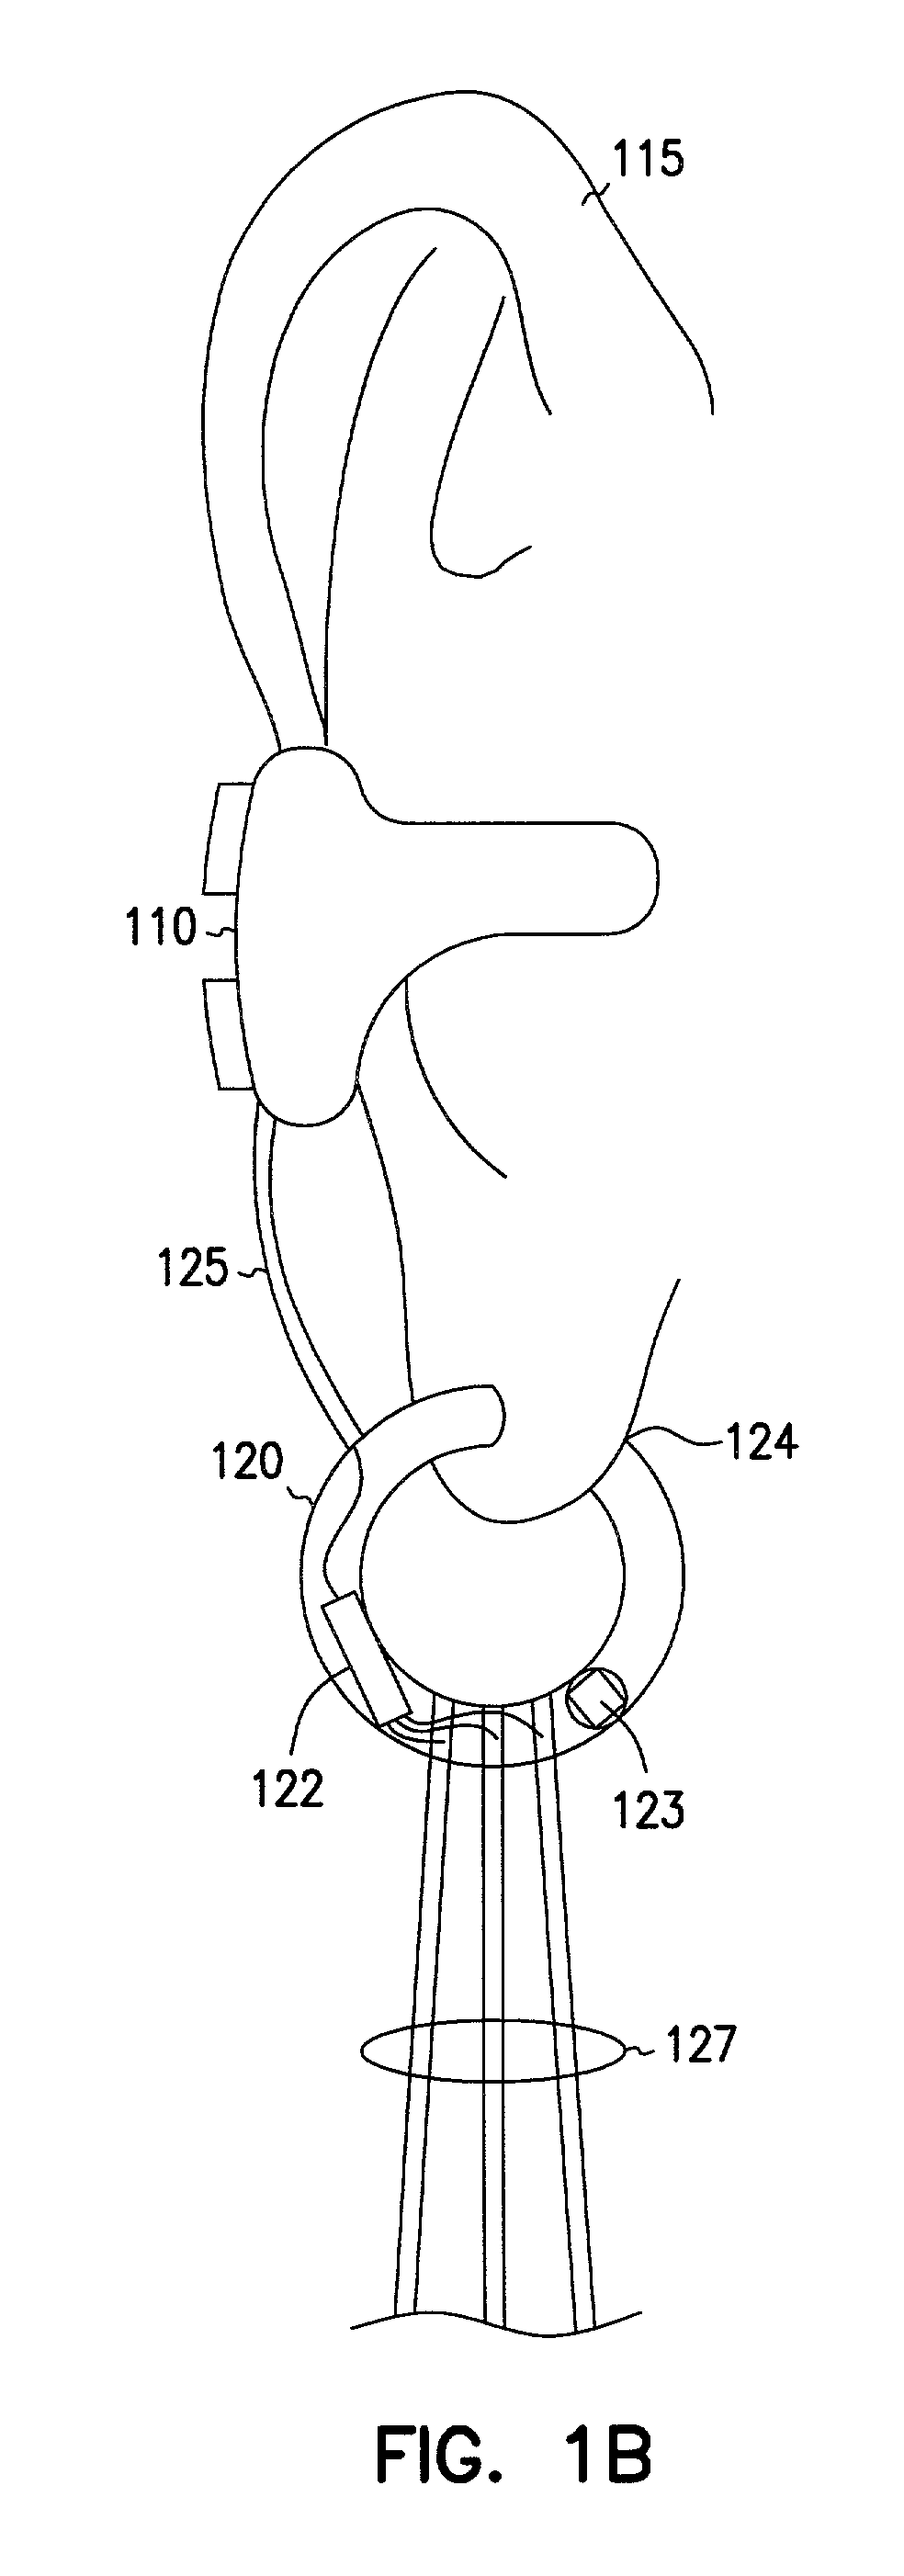 Audio earpiece and peripheral devices